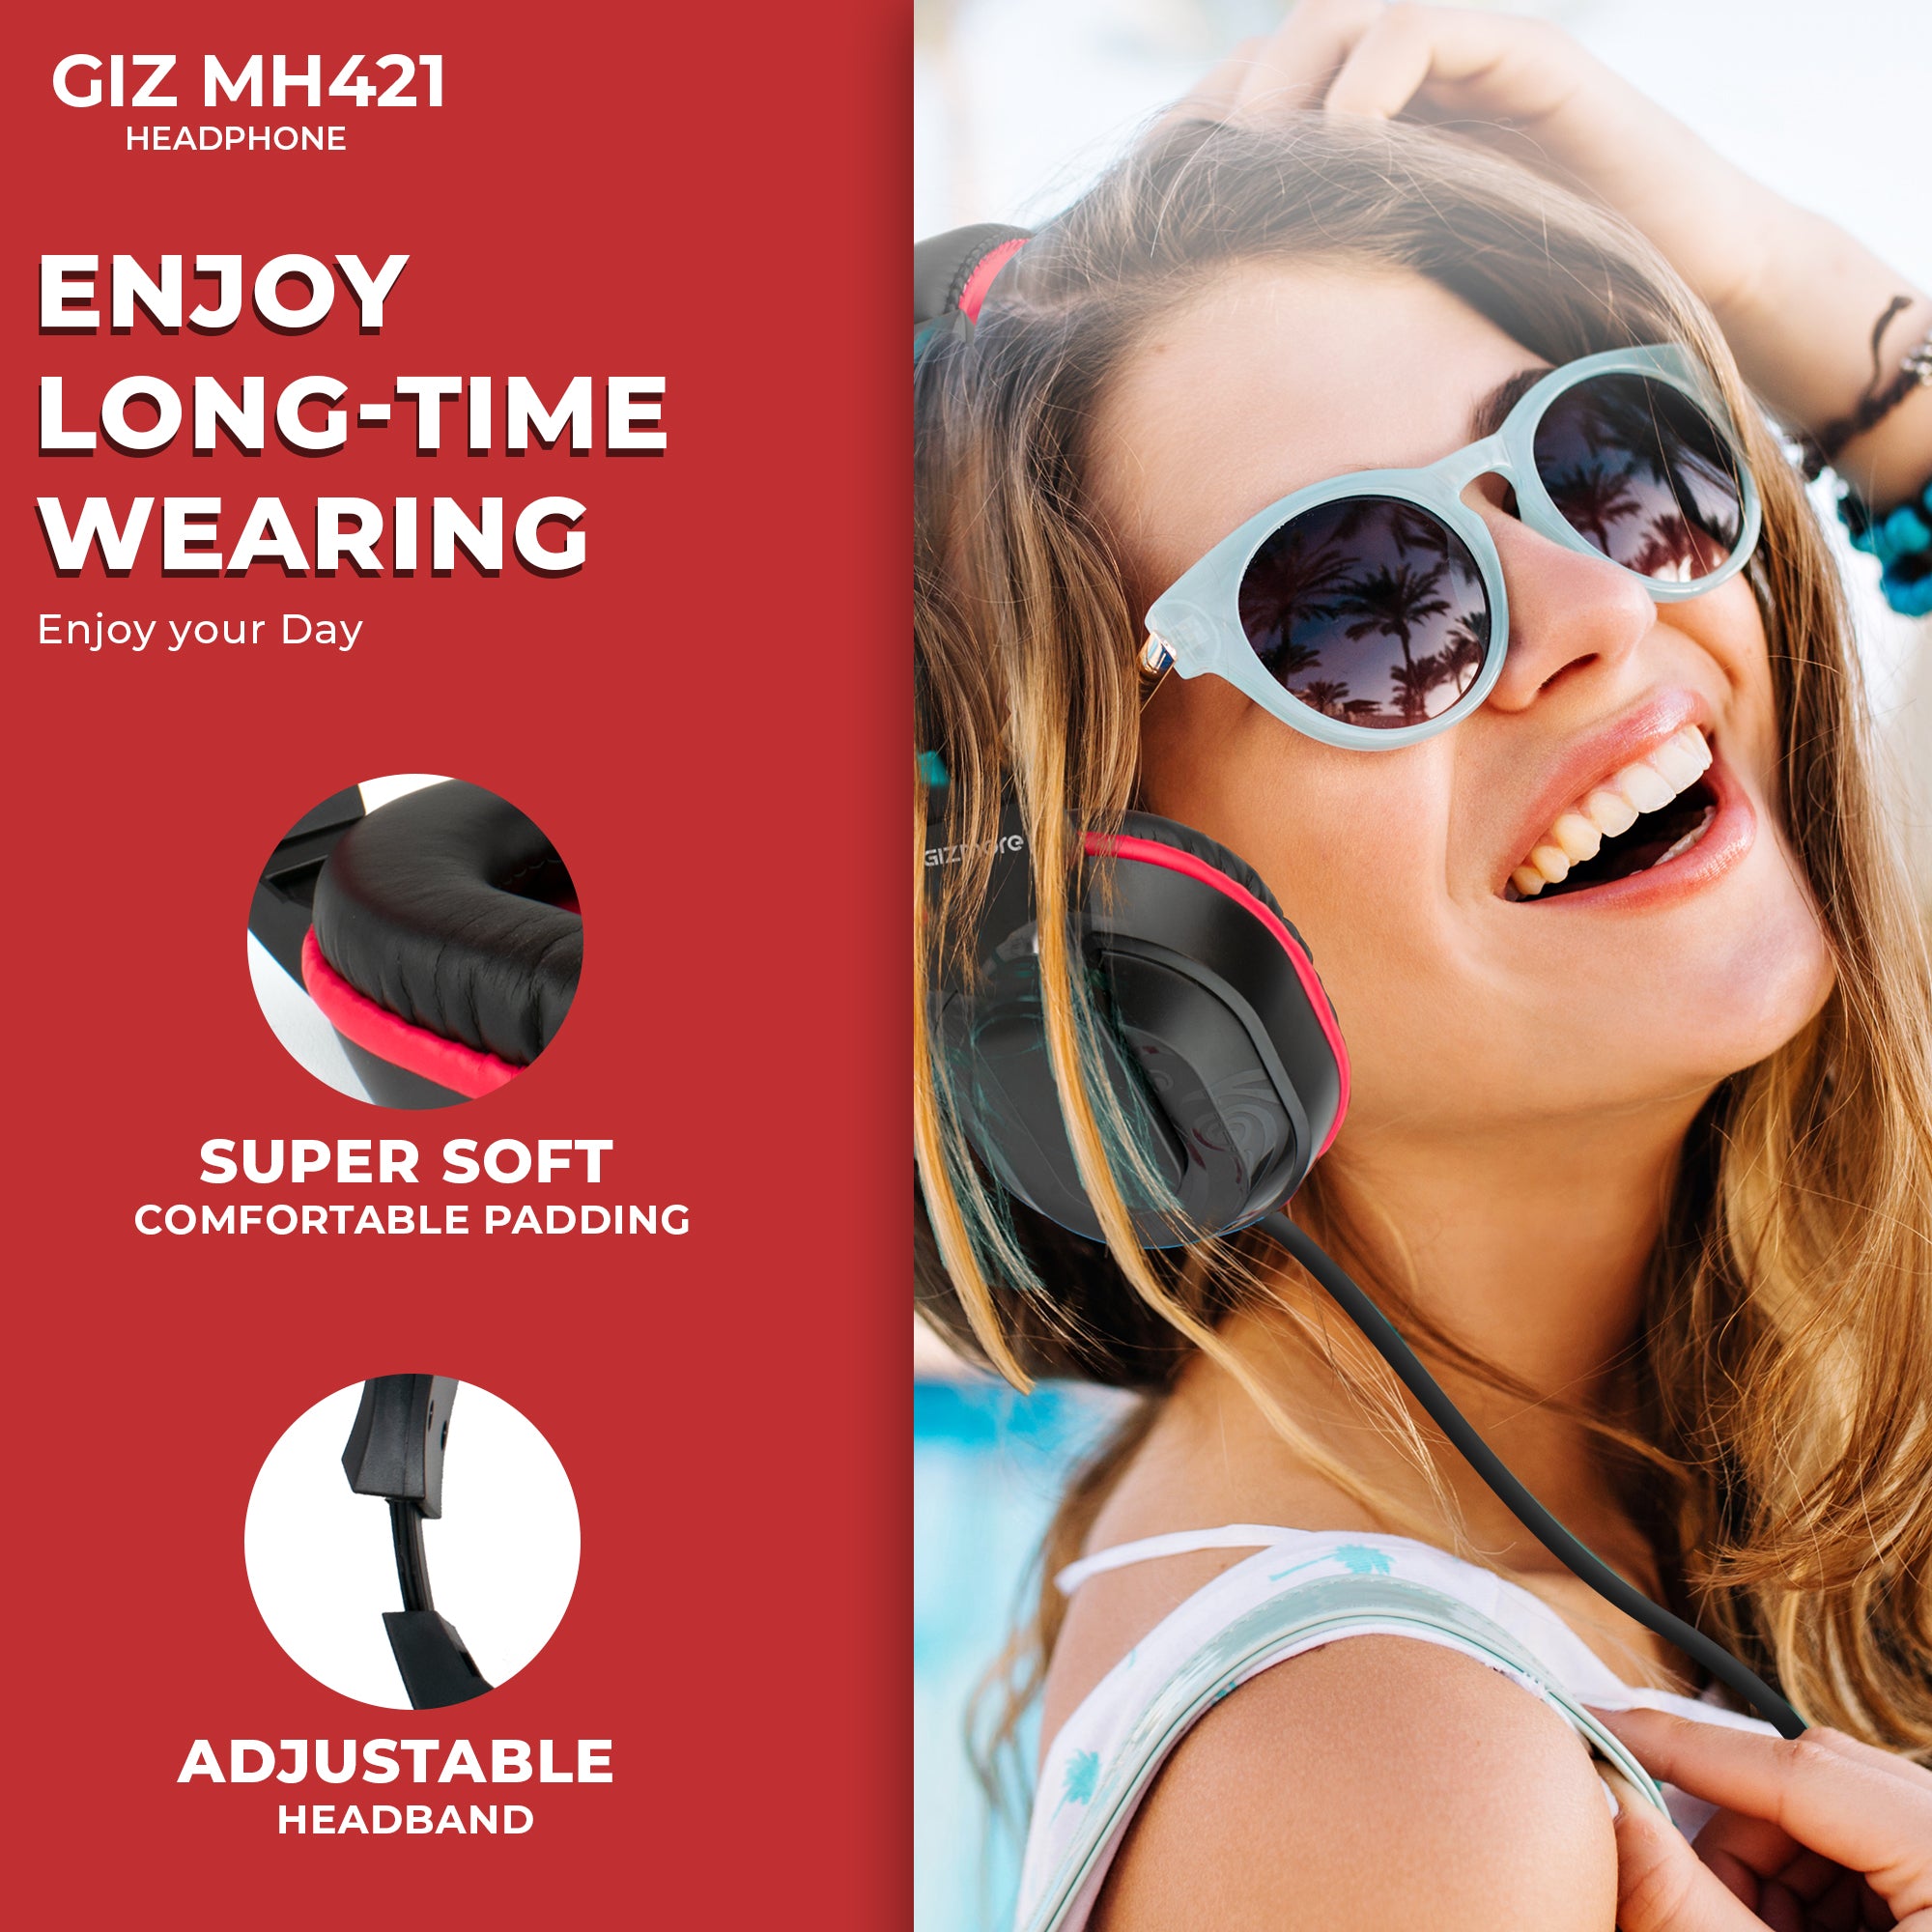 GIZMORE MH421 Wired Over Ear Headphone with Microphone Stereo Headset, 3.5 mm Audio Input, Volume Control Wheel, Adjustable Headband Compatible with Laptop, PC, Smartphones (Black)